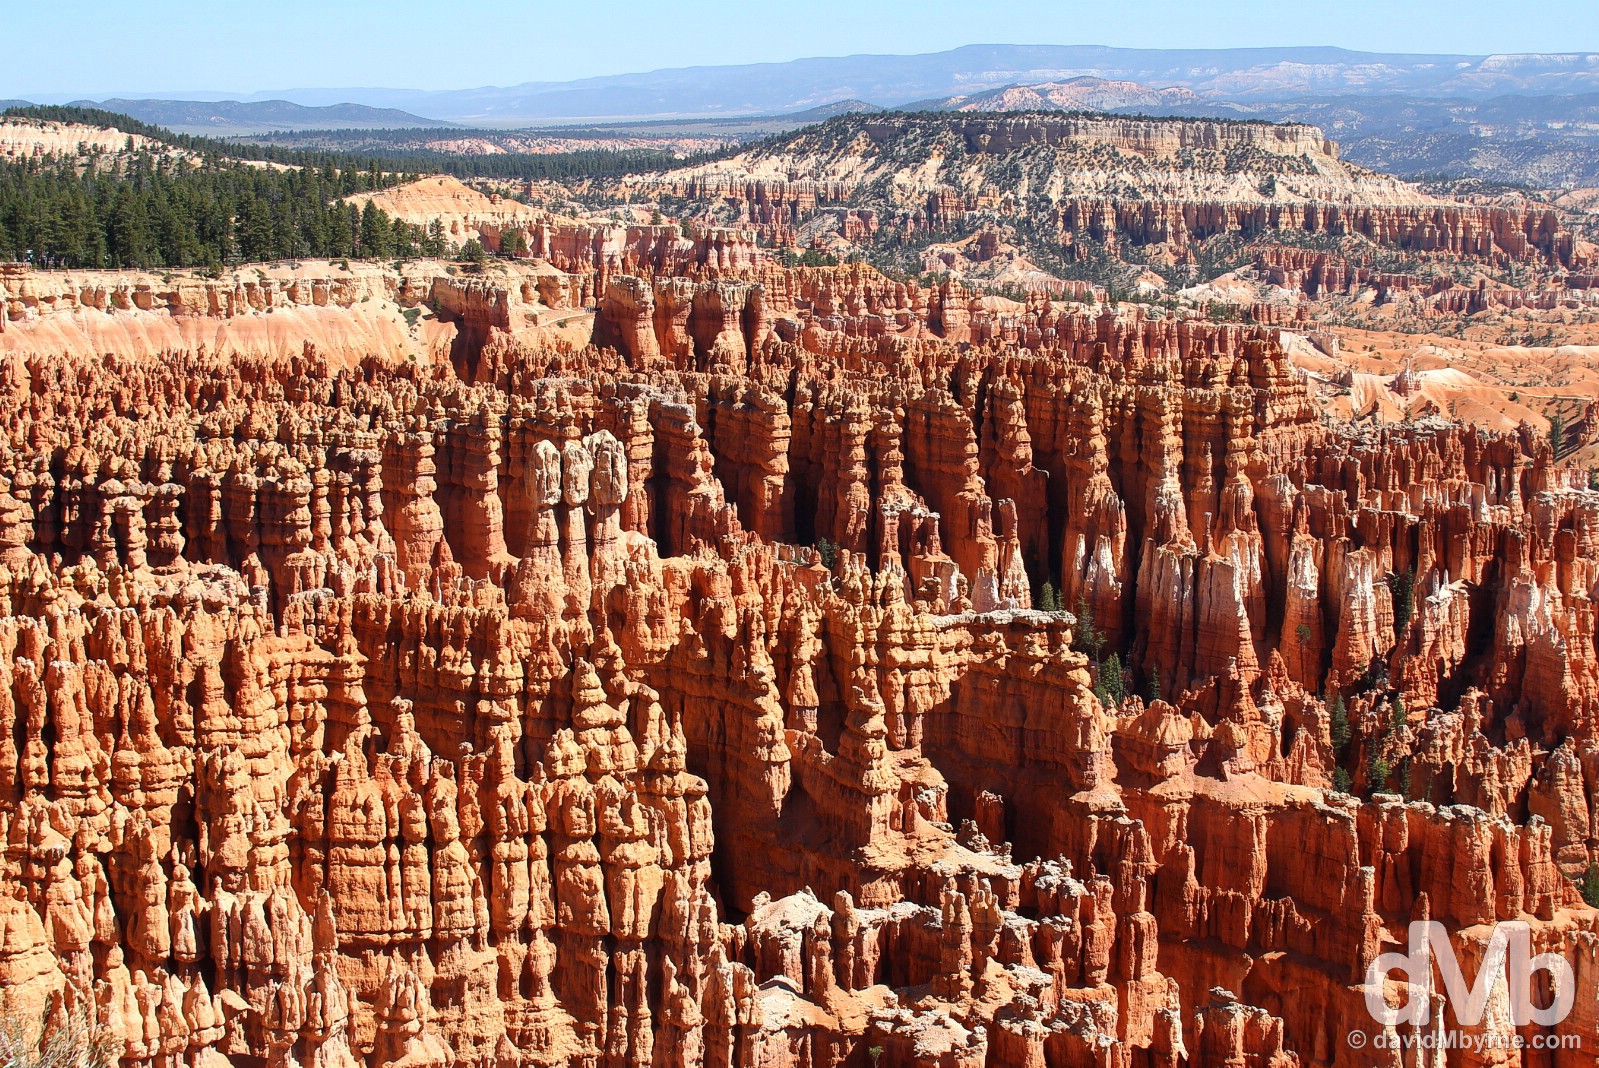 The Bryce Amphitheater of Bryce Canyon National Park, Utah, USA. September 8, 2016.